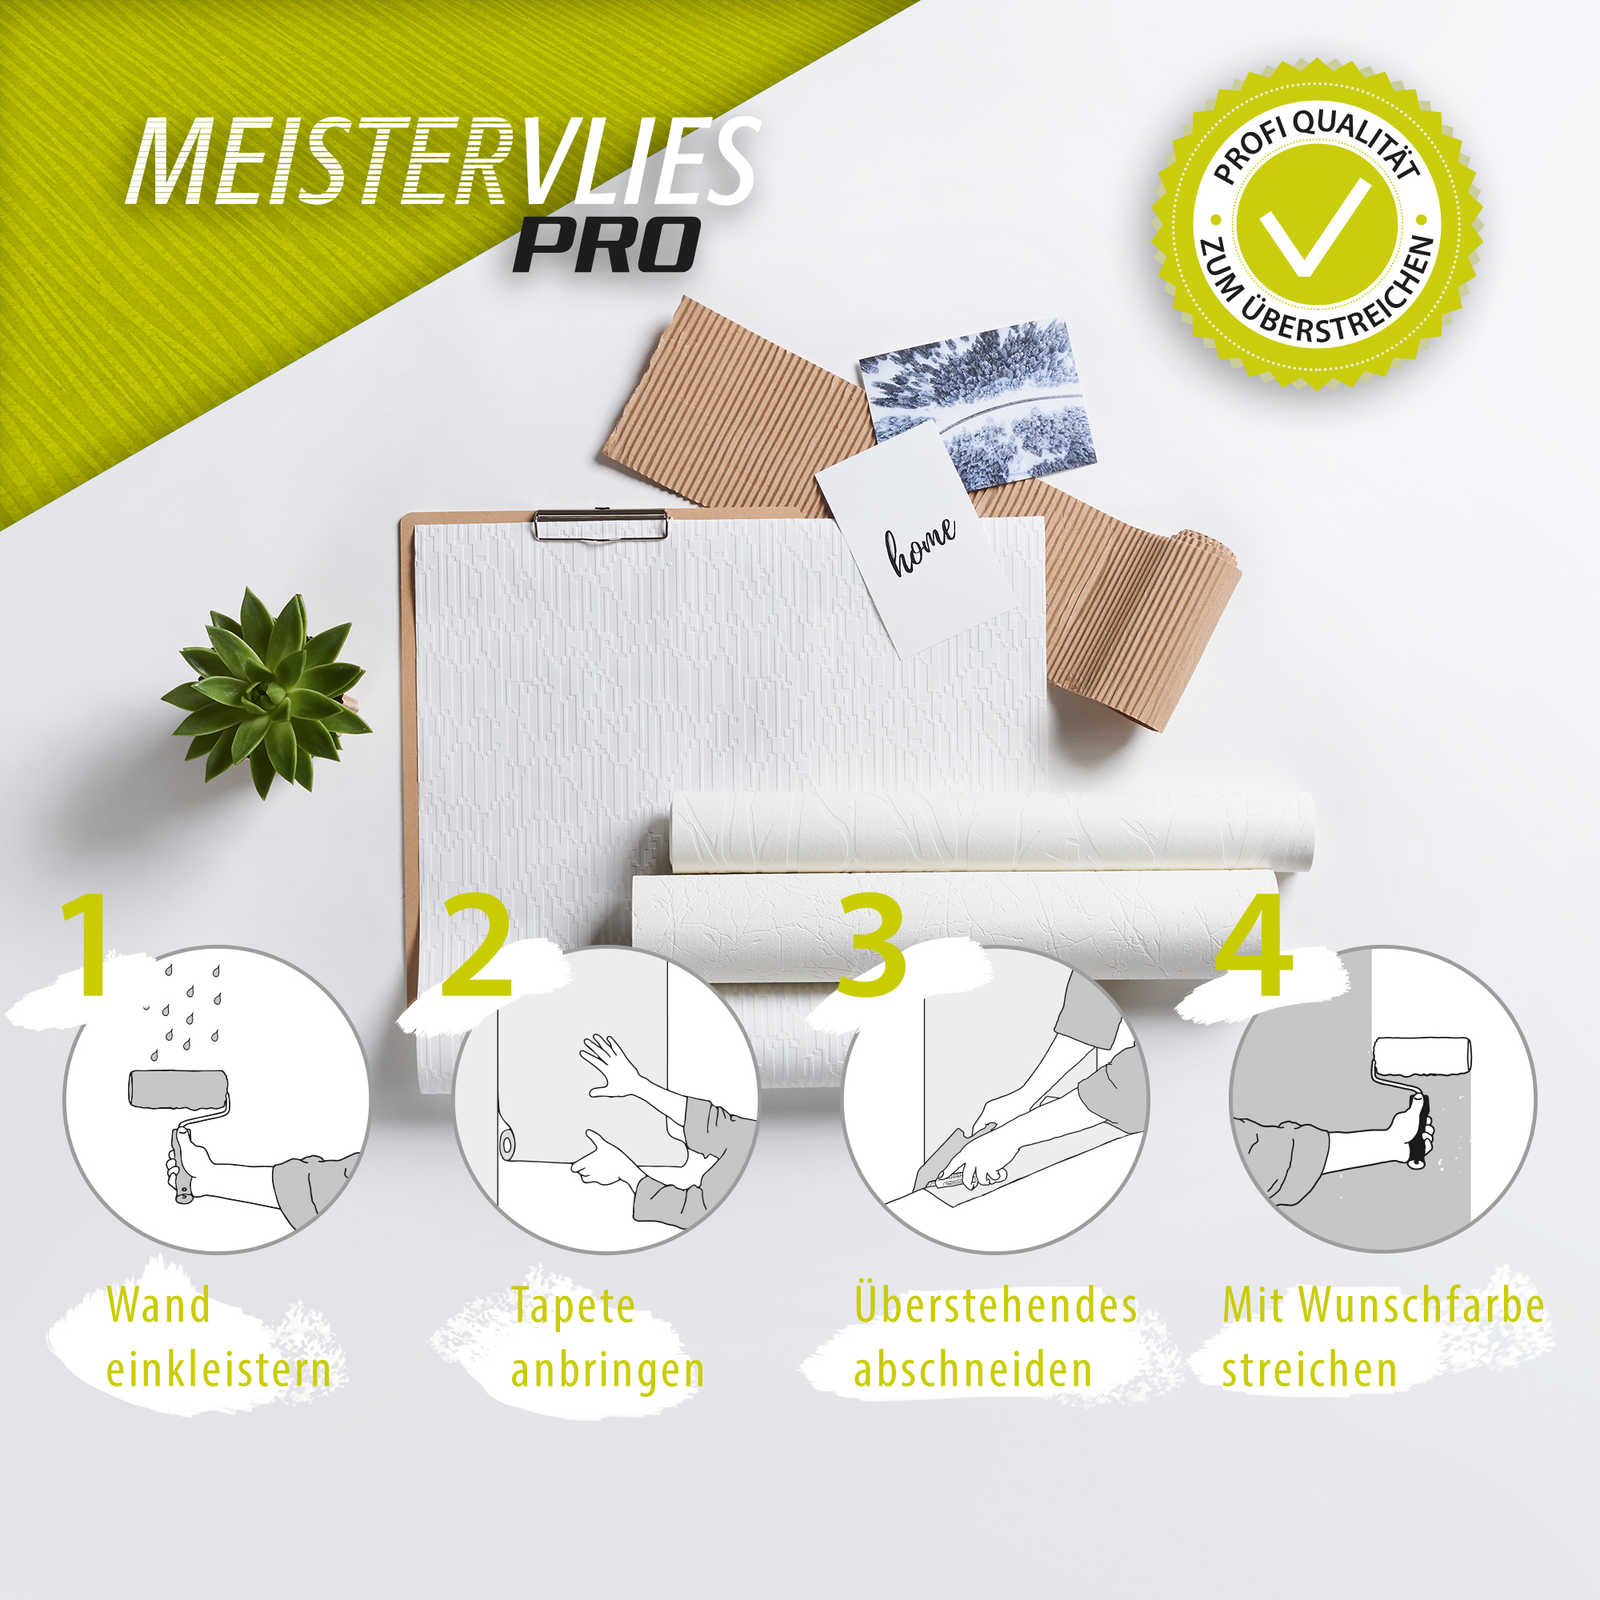             Meistervlies wallpaper structure pattern nature - paintable
        